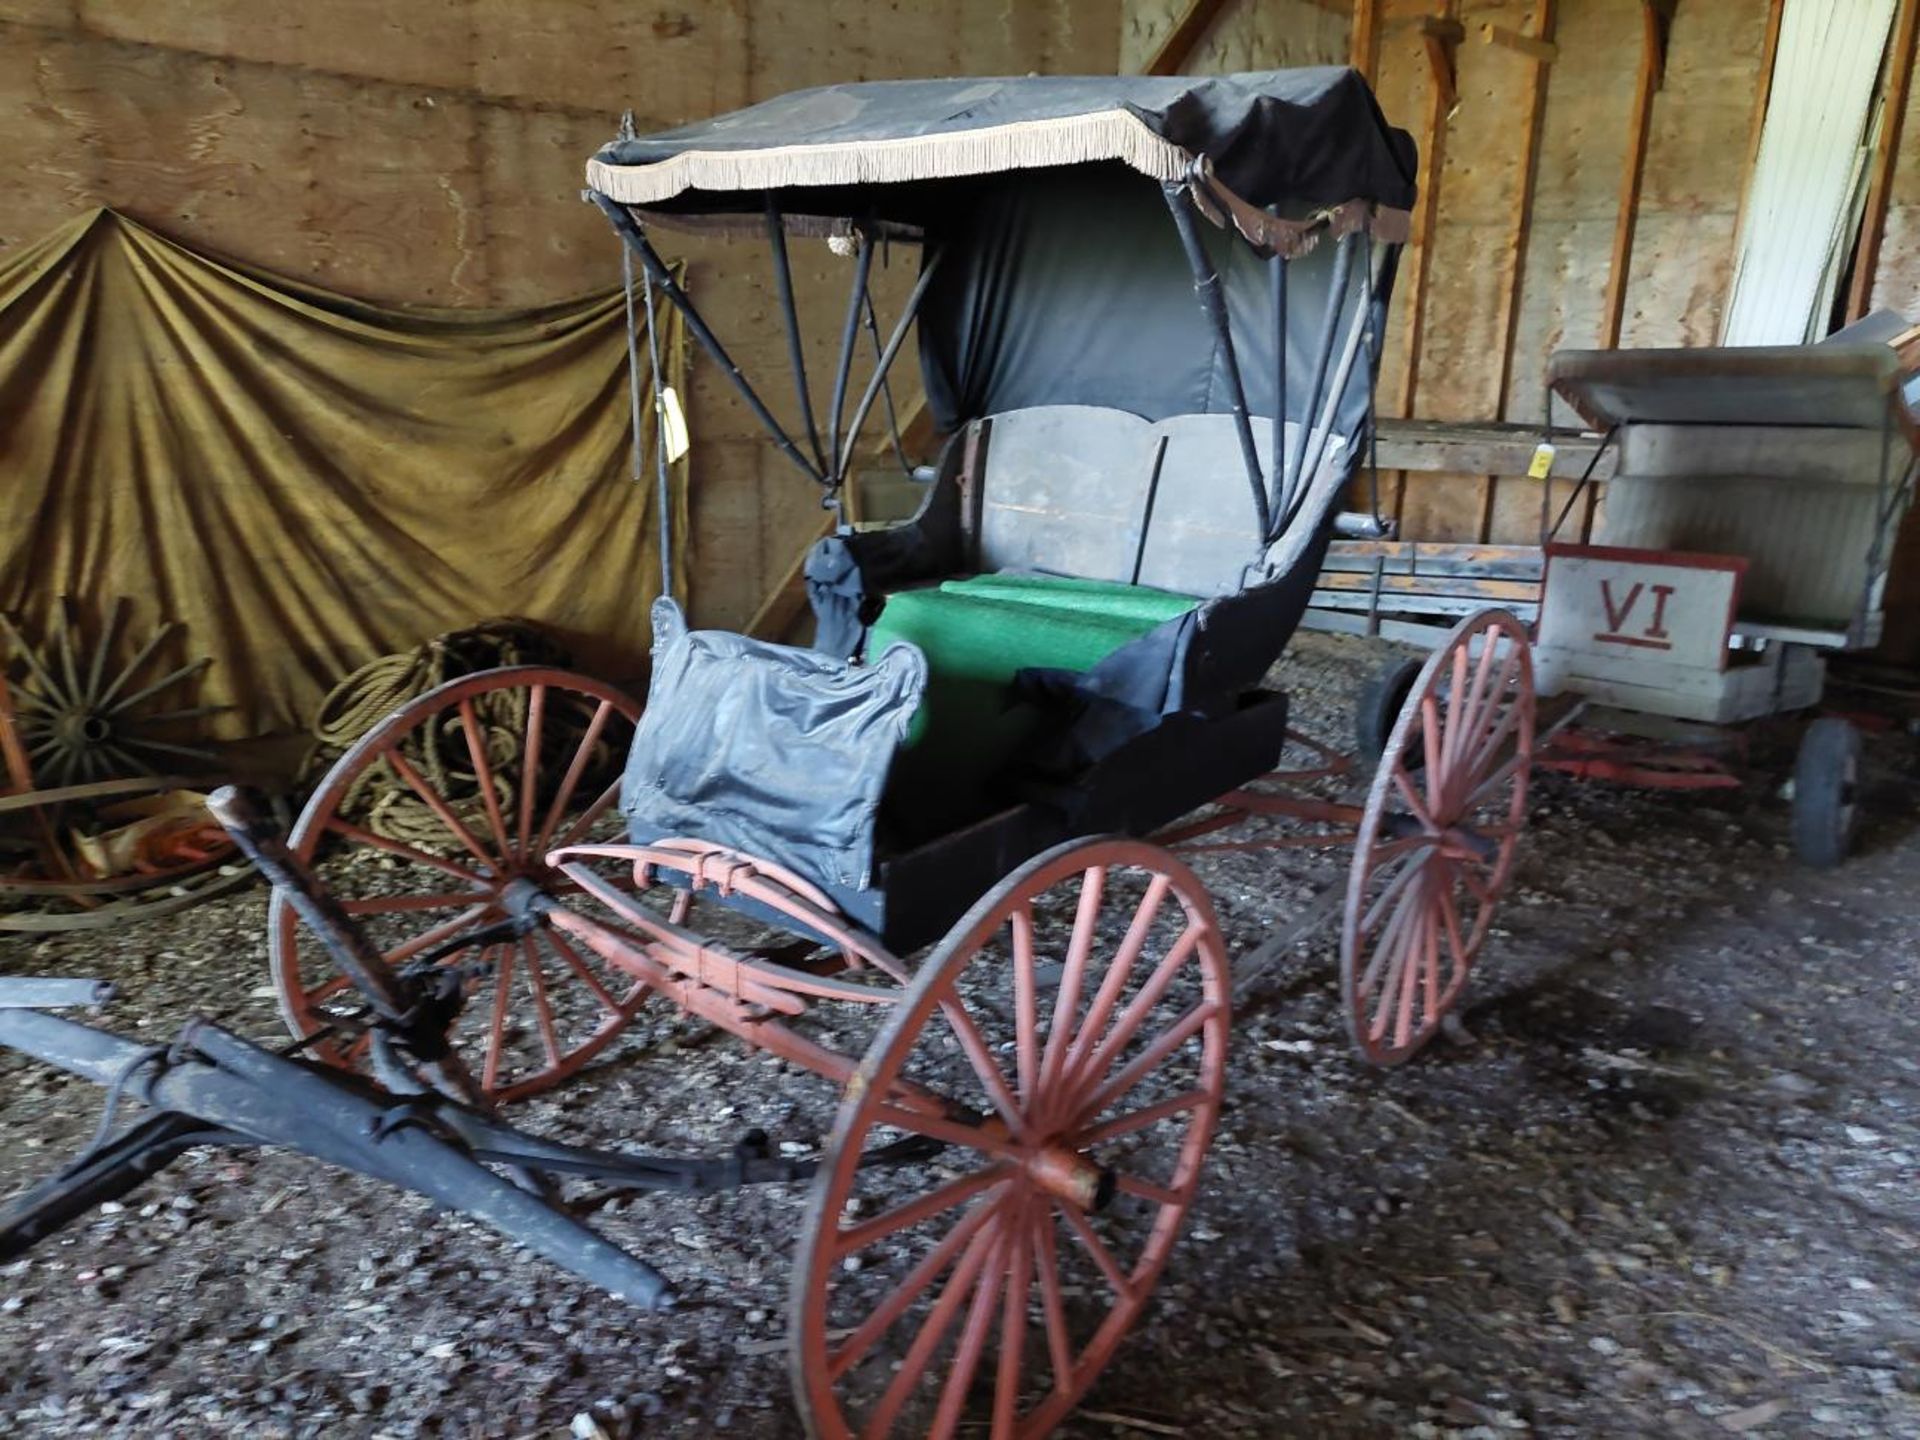 ANTIQUE HORSE DRAWN DOCTORS BUGGY (SAID TO BE ORIGINAL) - Image 3 of 7